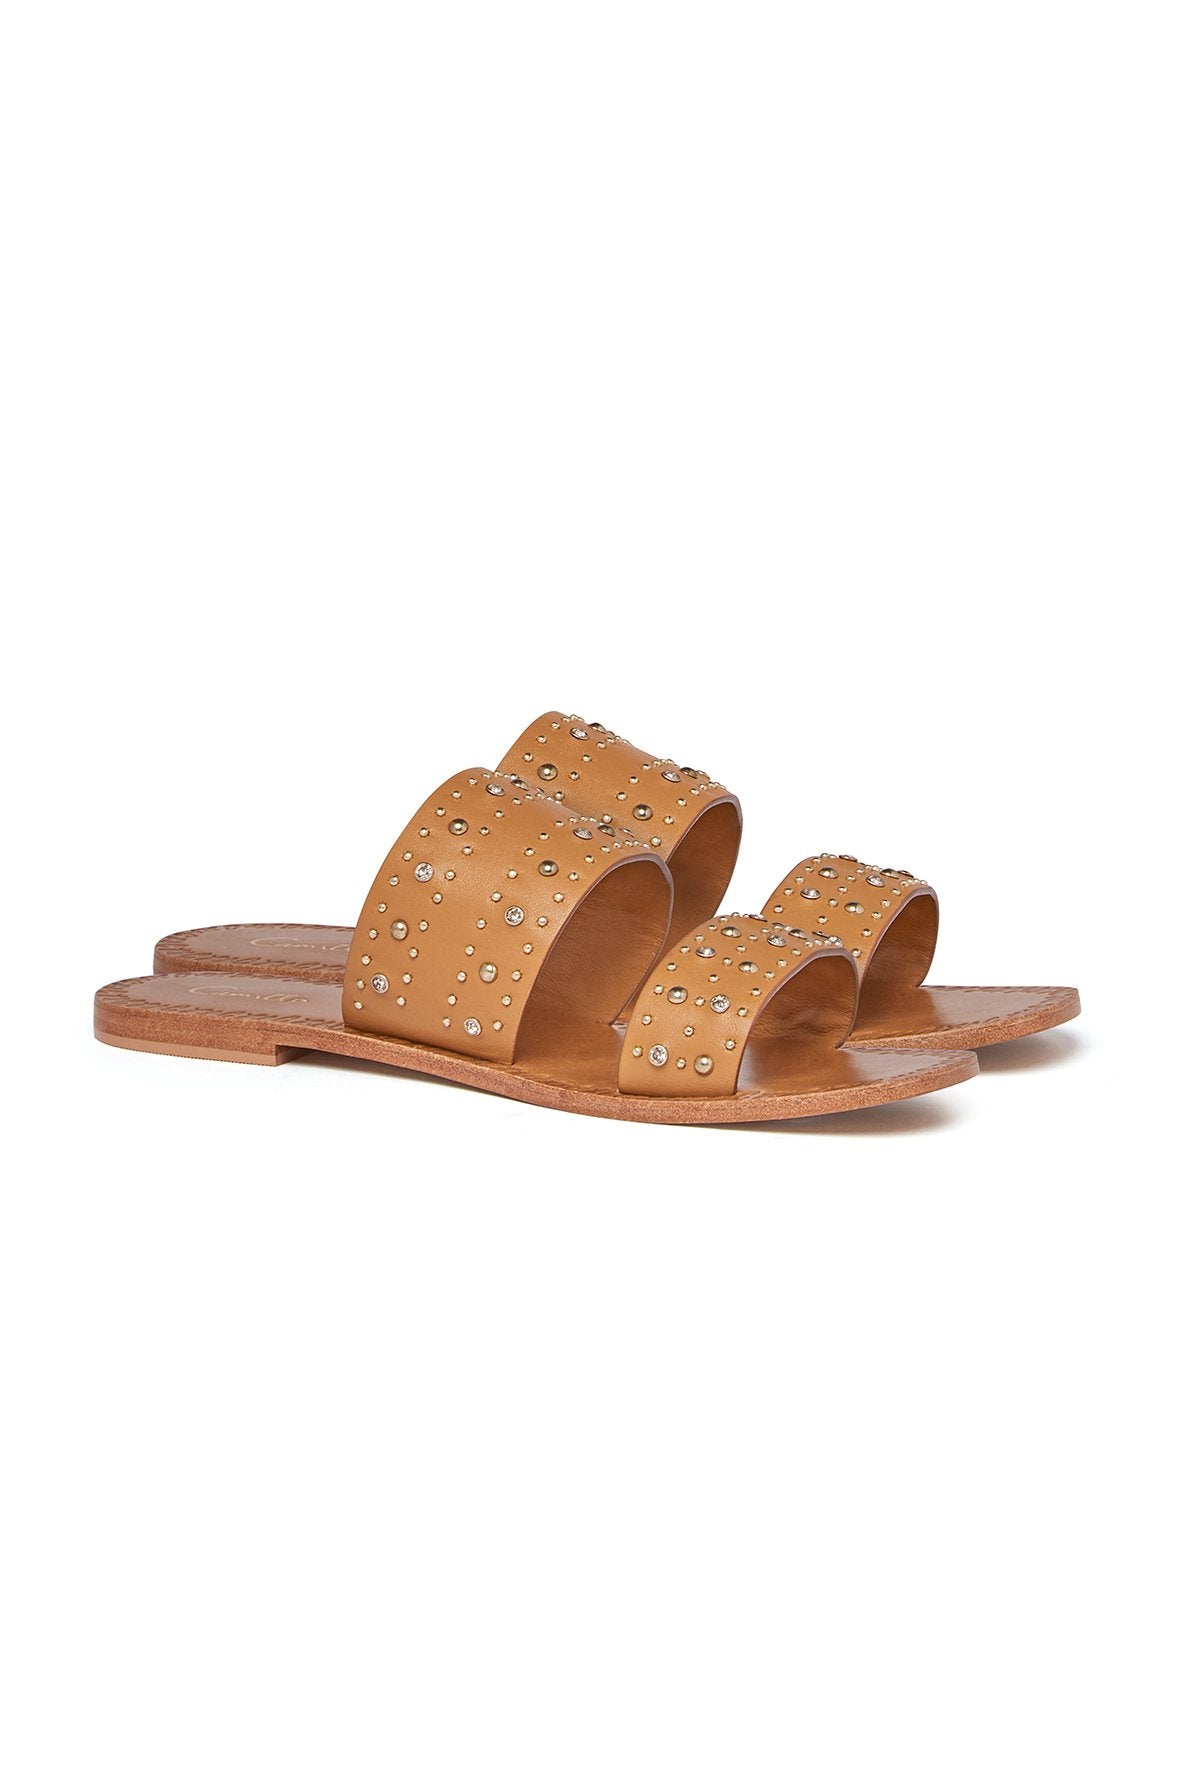 KNOTTED FOOTBED SLIDE MOTO MAIKO